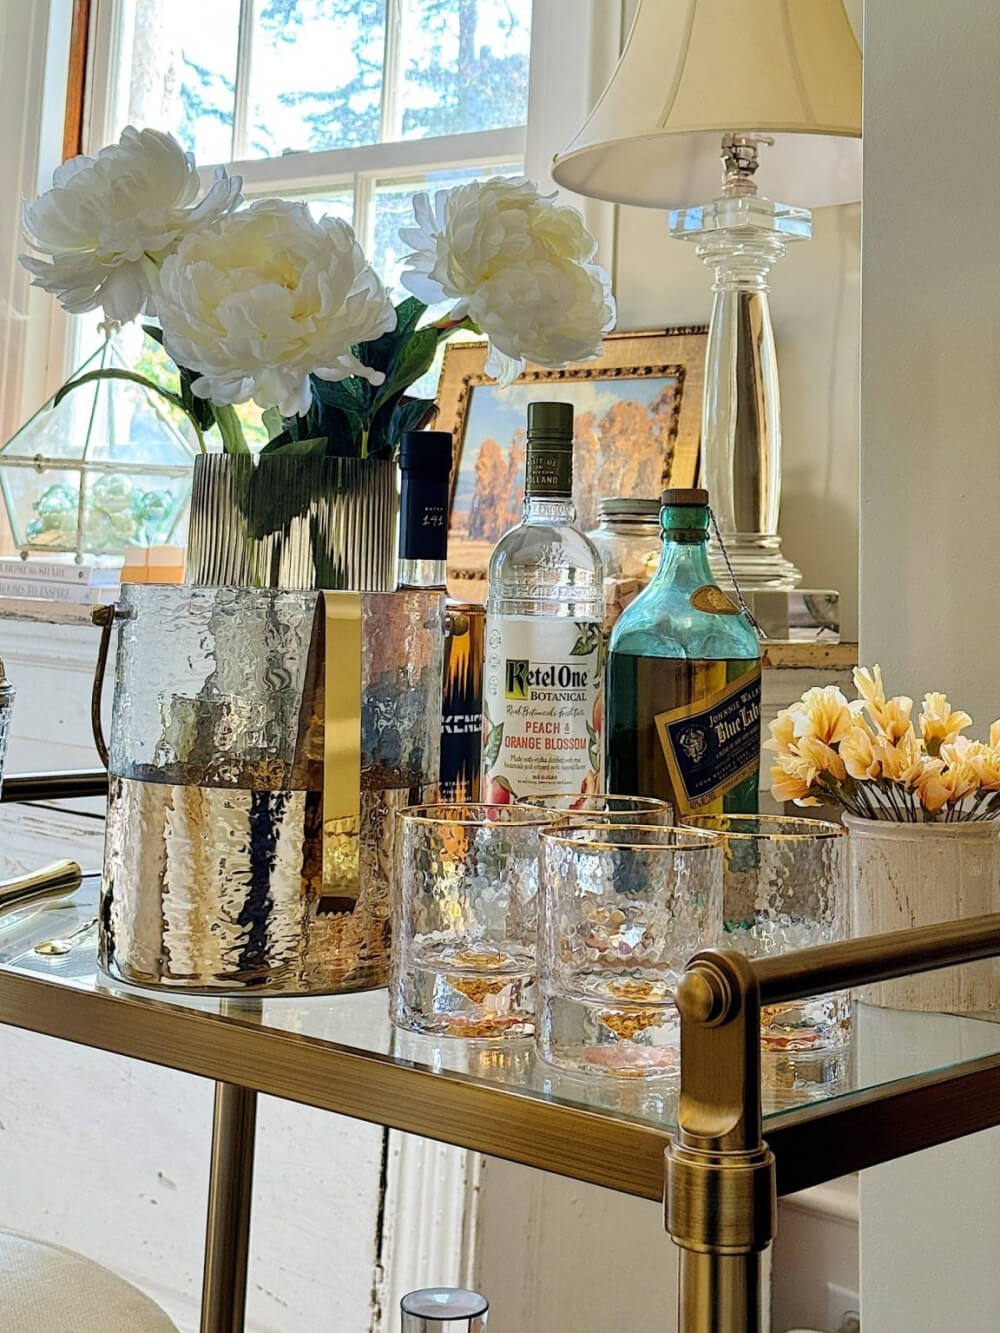 In The Love Of Home Files #22, this blogger shows you how to style a bar cart.